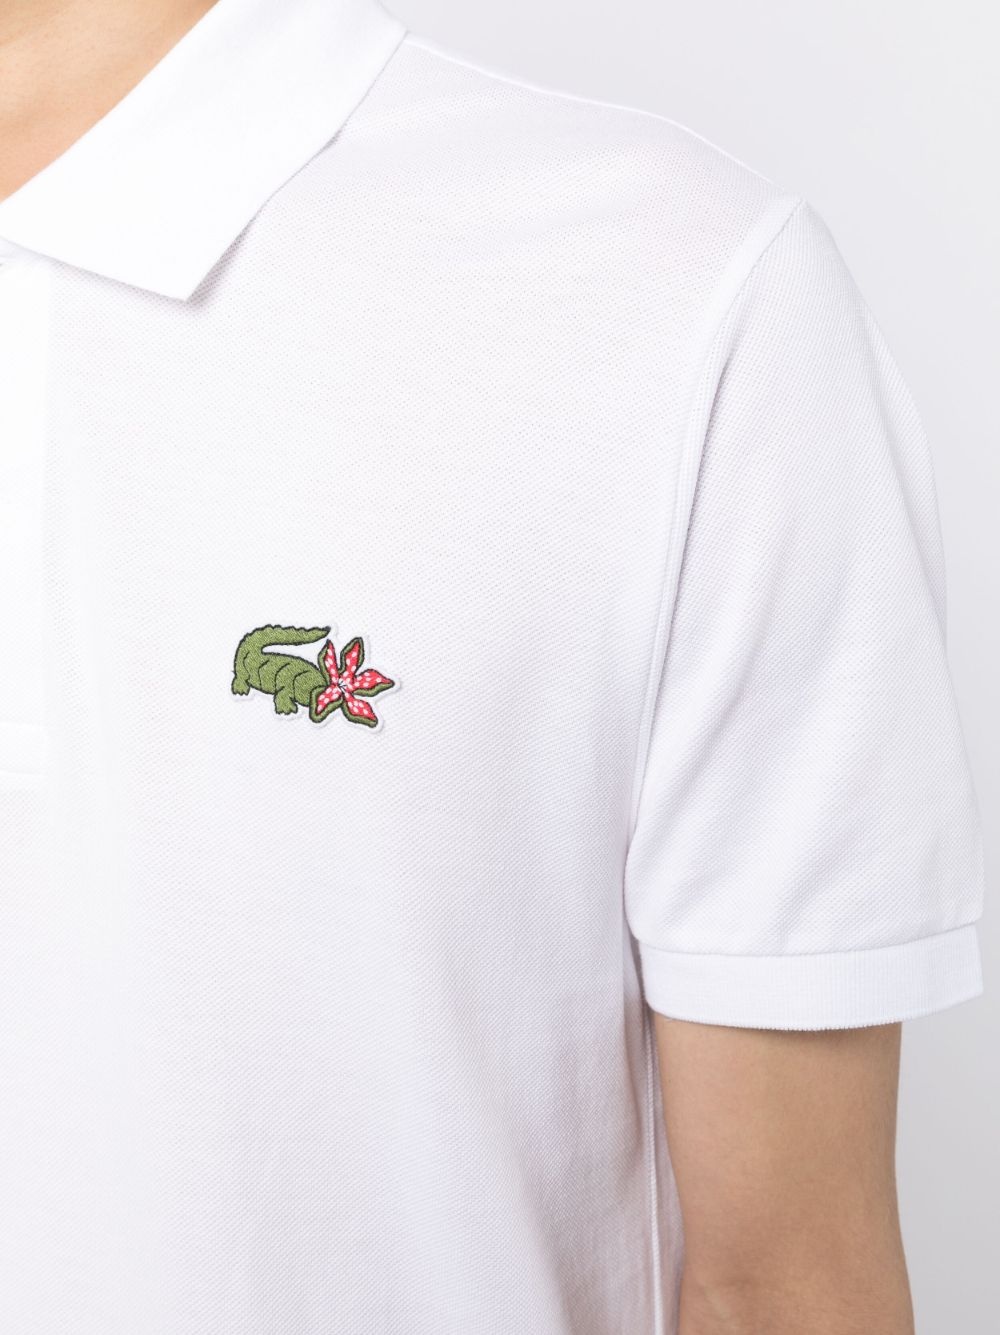 Lacoste Netflix Stranger Things Polo Shirt in Organic Cotton Classic Fit - 6 White